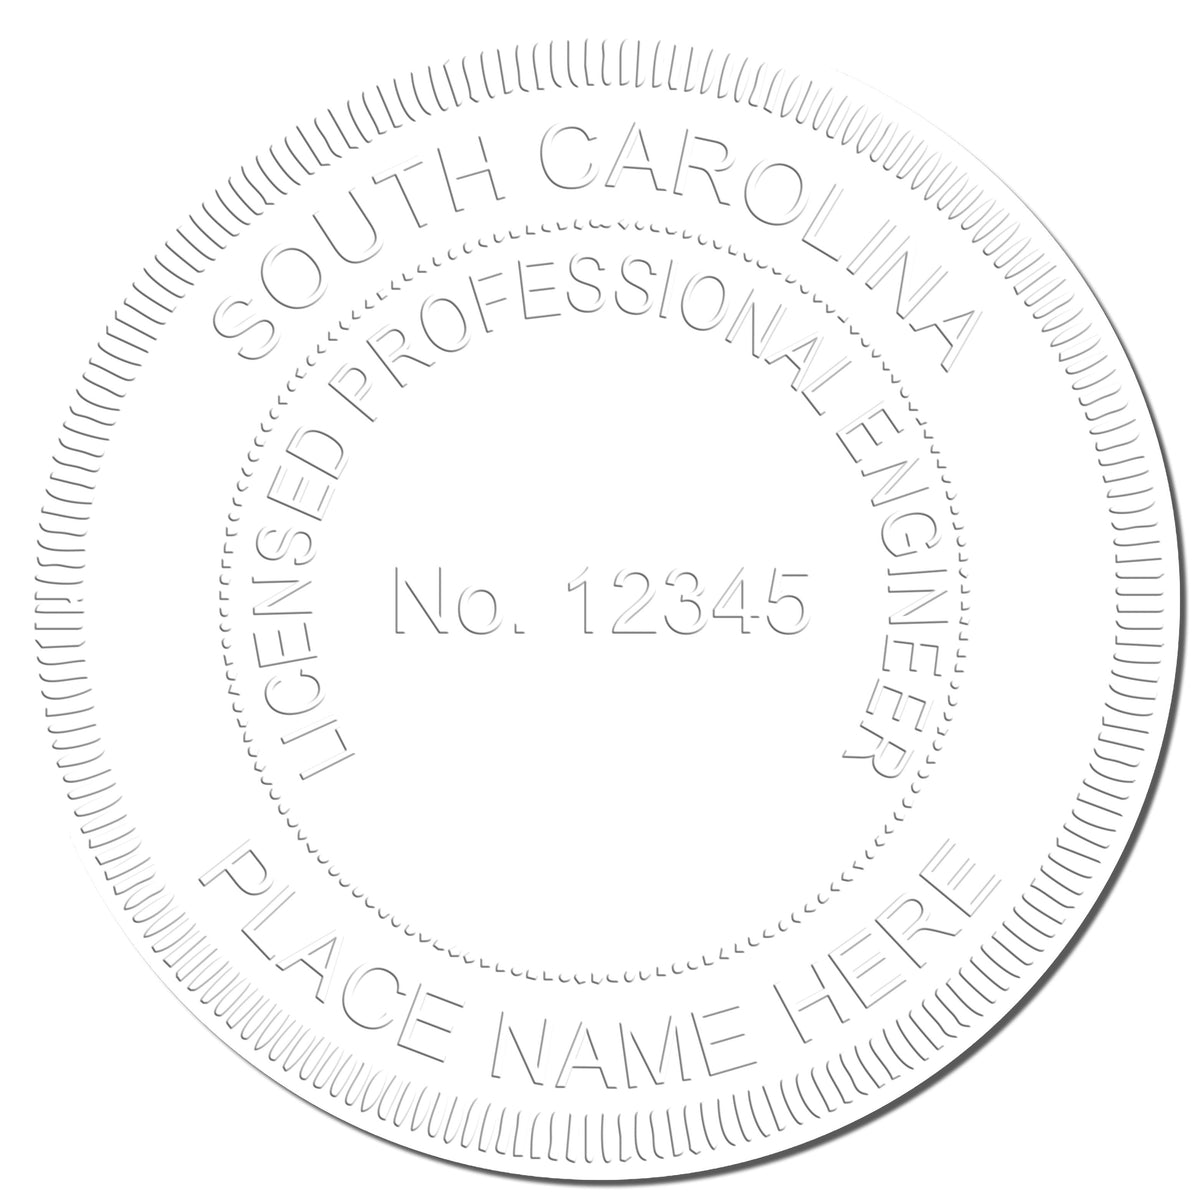 This paper is stamped with a sample imprint of the State of South Carolina Extended Long Reach Engineer Seal, signifying its quality and reliability.